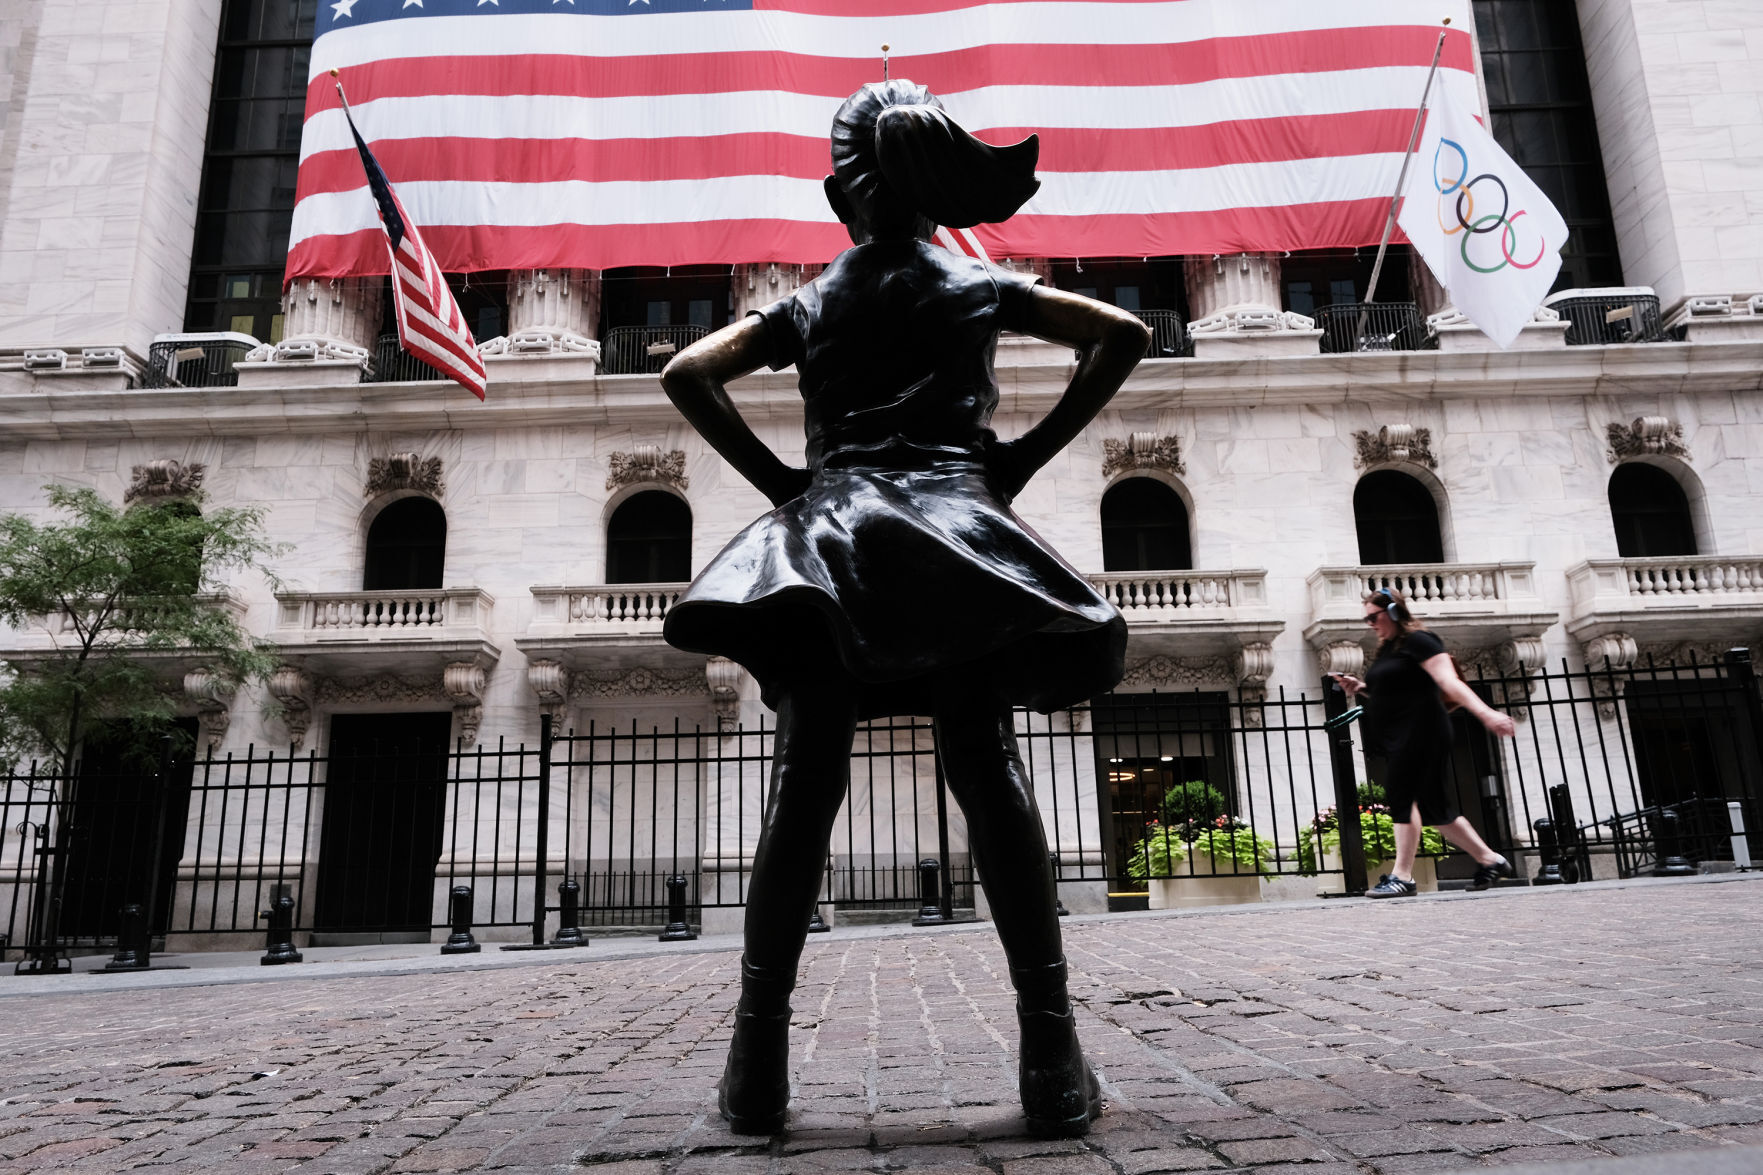 People walk by the Fearless Girl statue outside of the New York Stock Exchange in New York.    PHOTO CREDIT: Tribune News Service